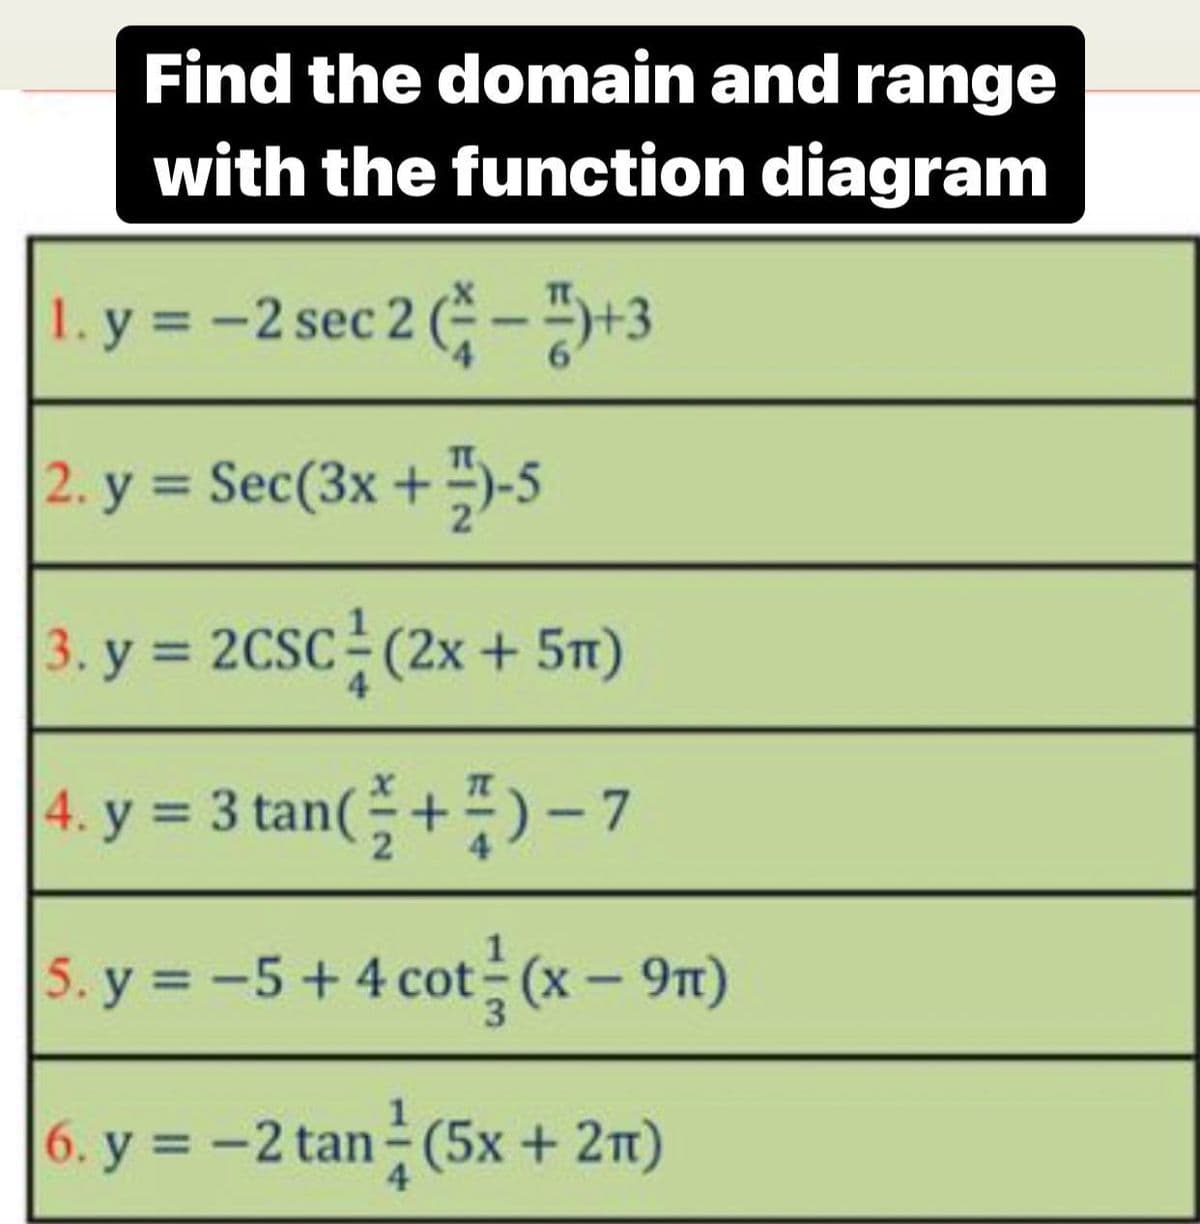 Find the domain and range
with the function diagram
1. y = -2 sec 2 ( - "+3
2. y = Sec(3x +-5
3. y 2CSC (2x+ 5T)
4. y = 3 tan(+)-7
5. y = -5+ 4 cot(x - 9n)
6. y = -2 tan (5x + 2n)
4
